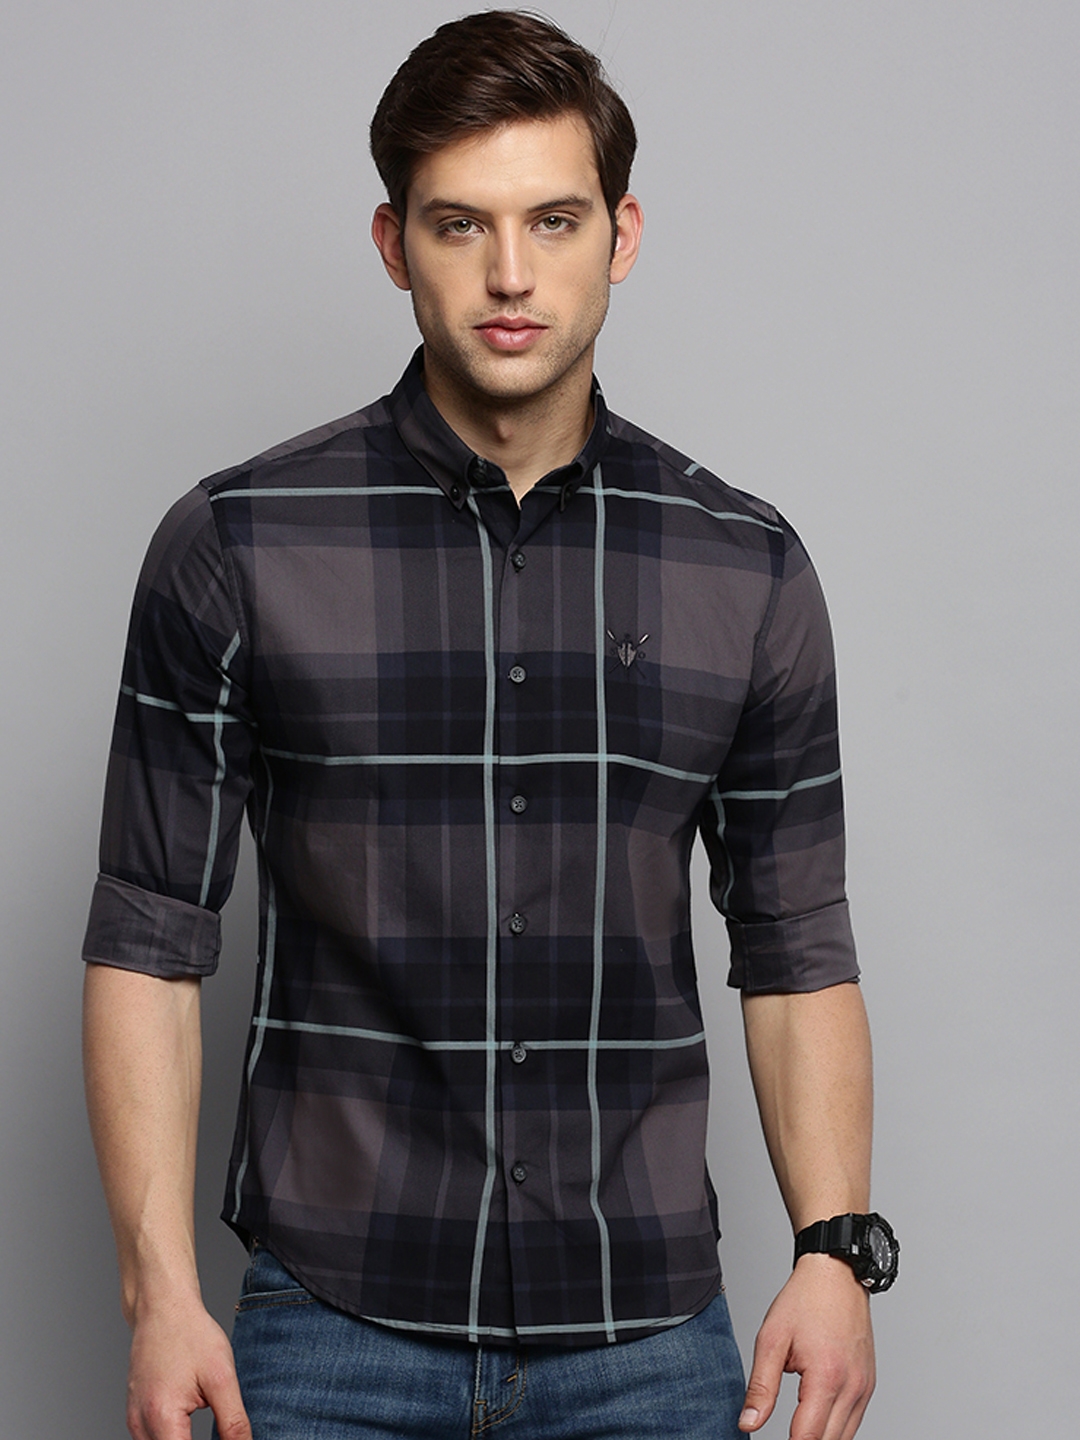 Showoff | SHOWOFF Men's Spread Collar Checked Navy Blue Classic Shirt 1